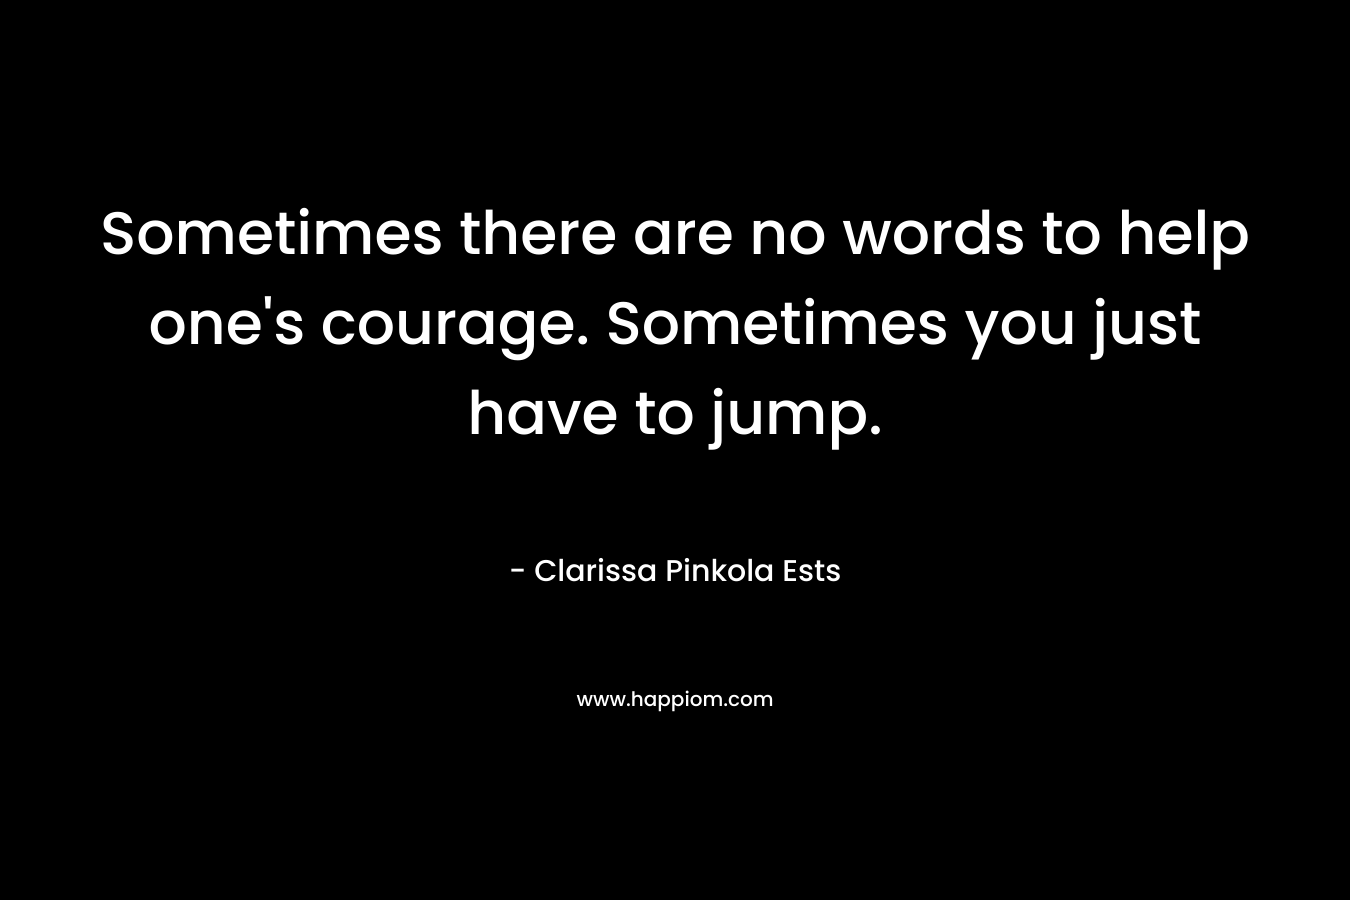 Sometimes there are no words to help one’s courage. Sometimes you just have to jump. – Clarissa Pinkola Ests